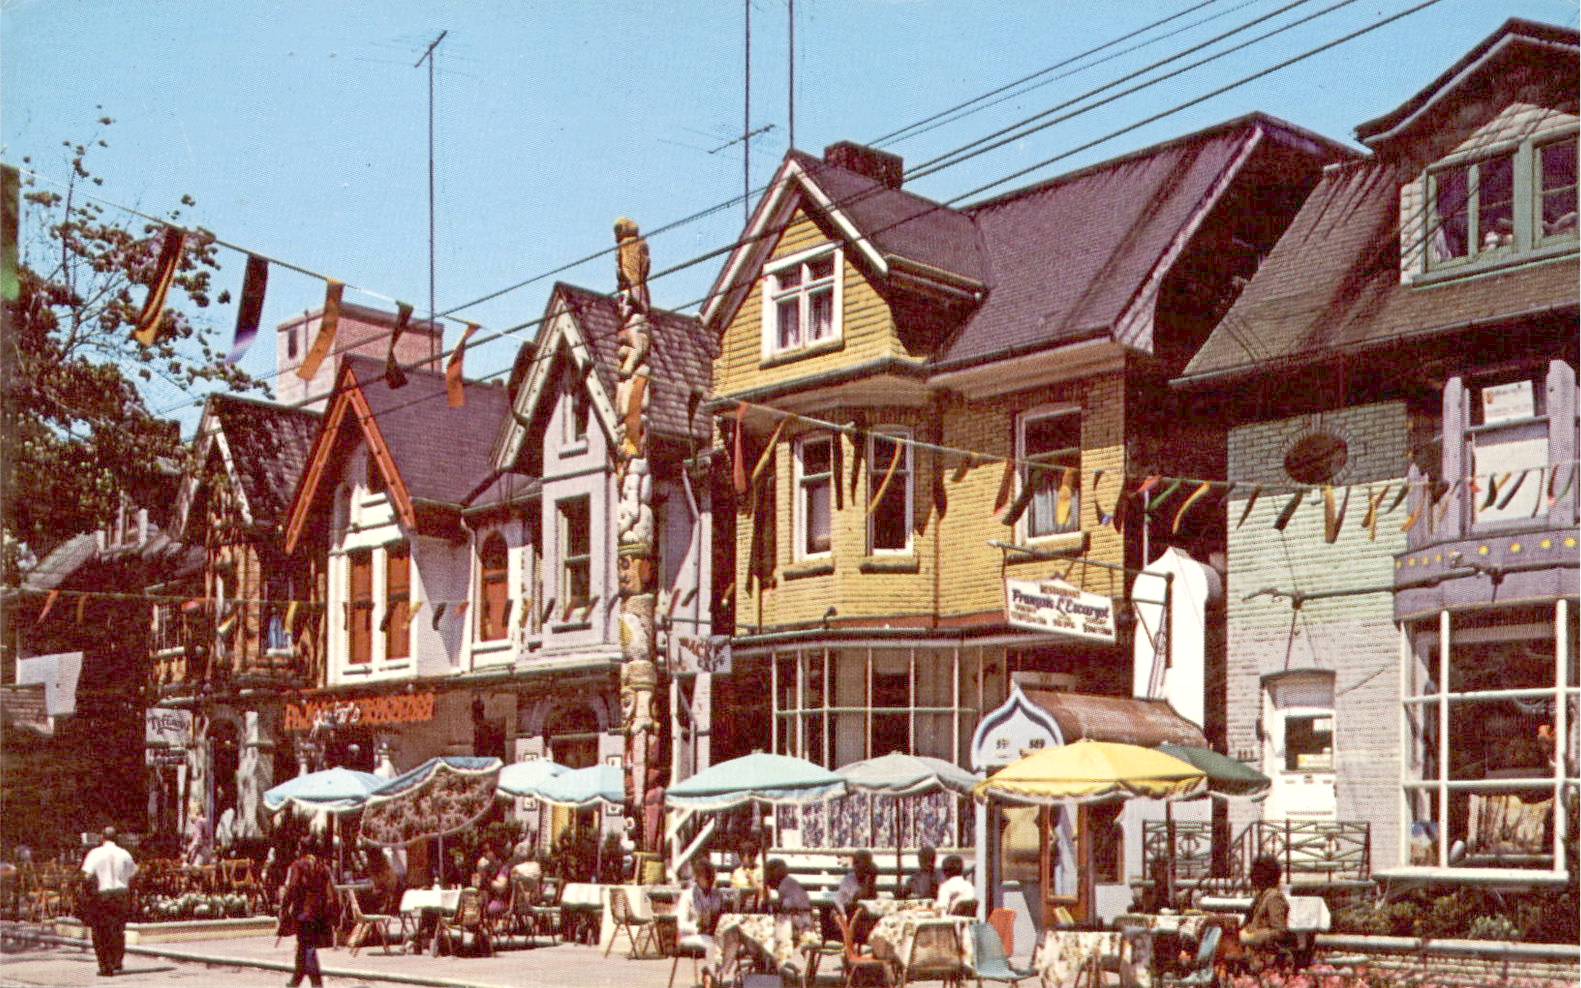 xx postcard - toronto - markham street village - shops and people eating outside in front of restaurants -totem pole - late 1960s